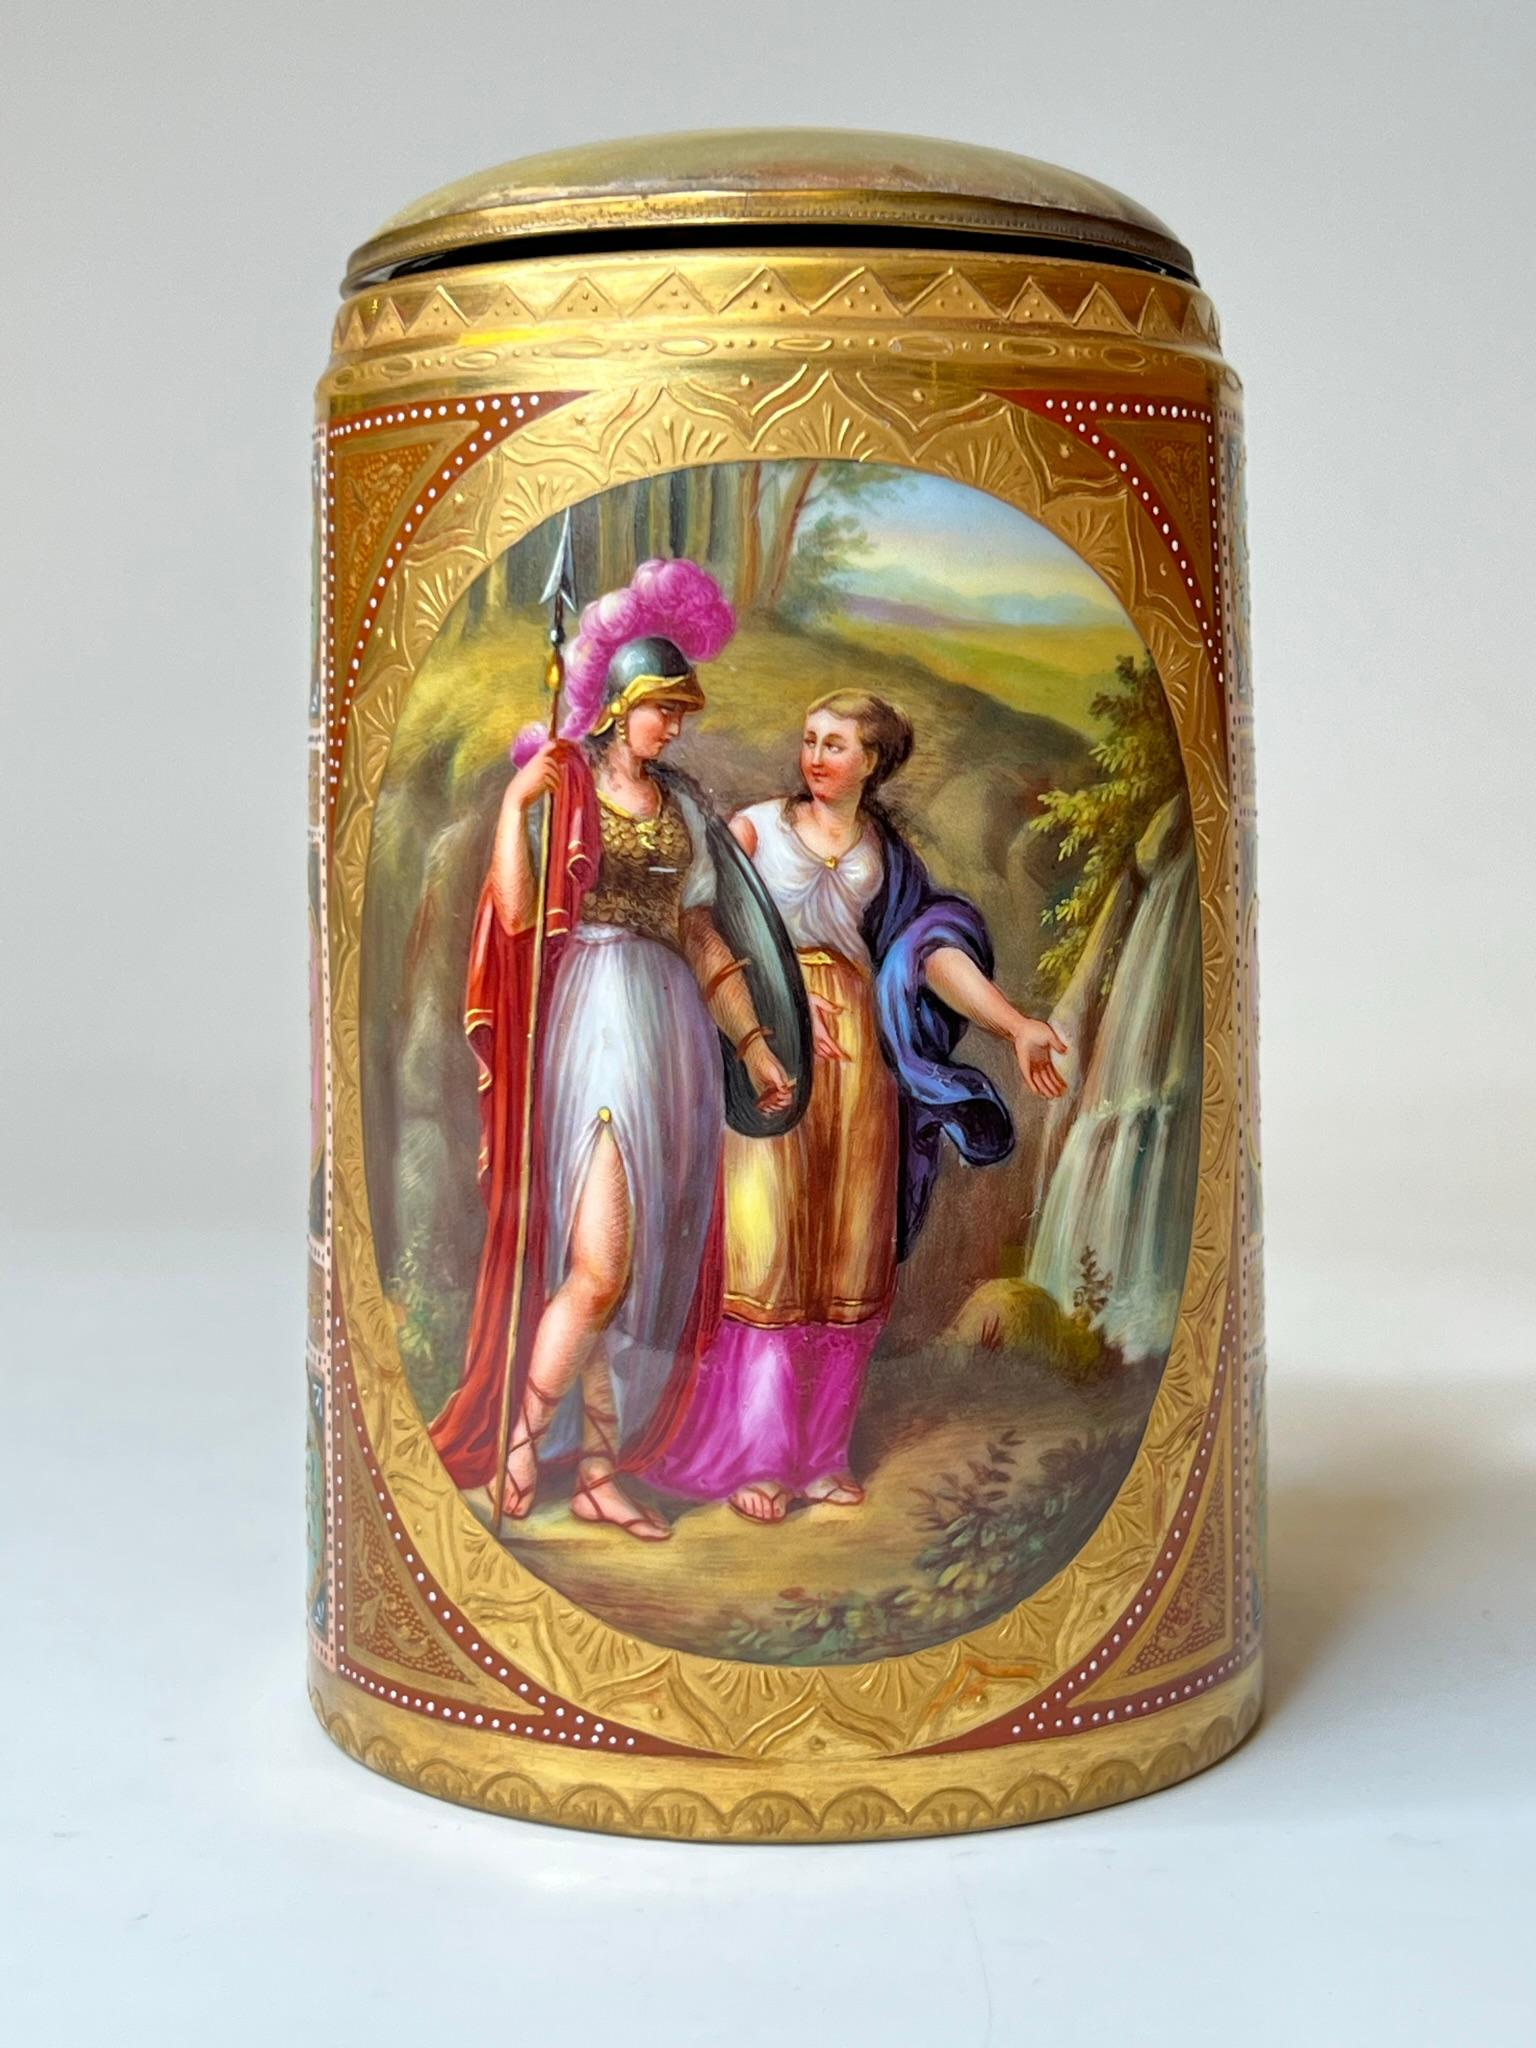 19th century Austrian stein with finely painted neoclassical cartouches celebrating the Roman goddess, Minerva, with extensive enameled and gilt decorations.  Excellent condition.  